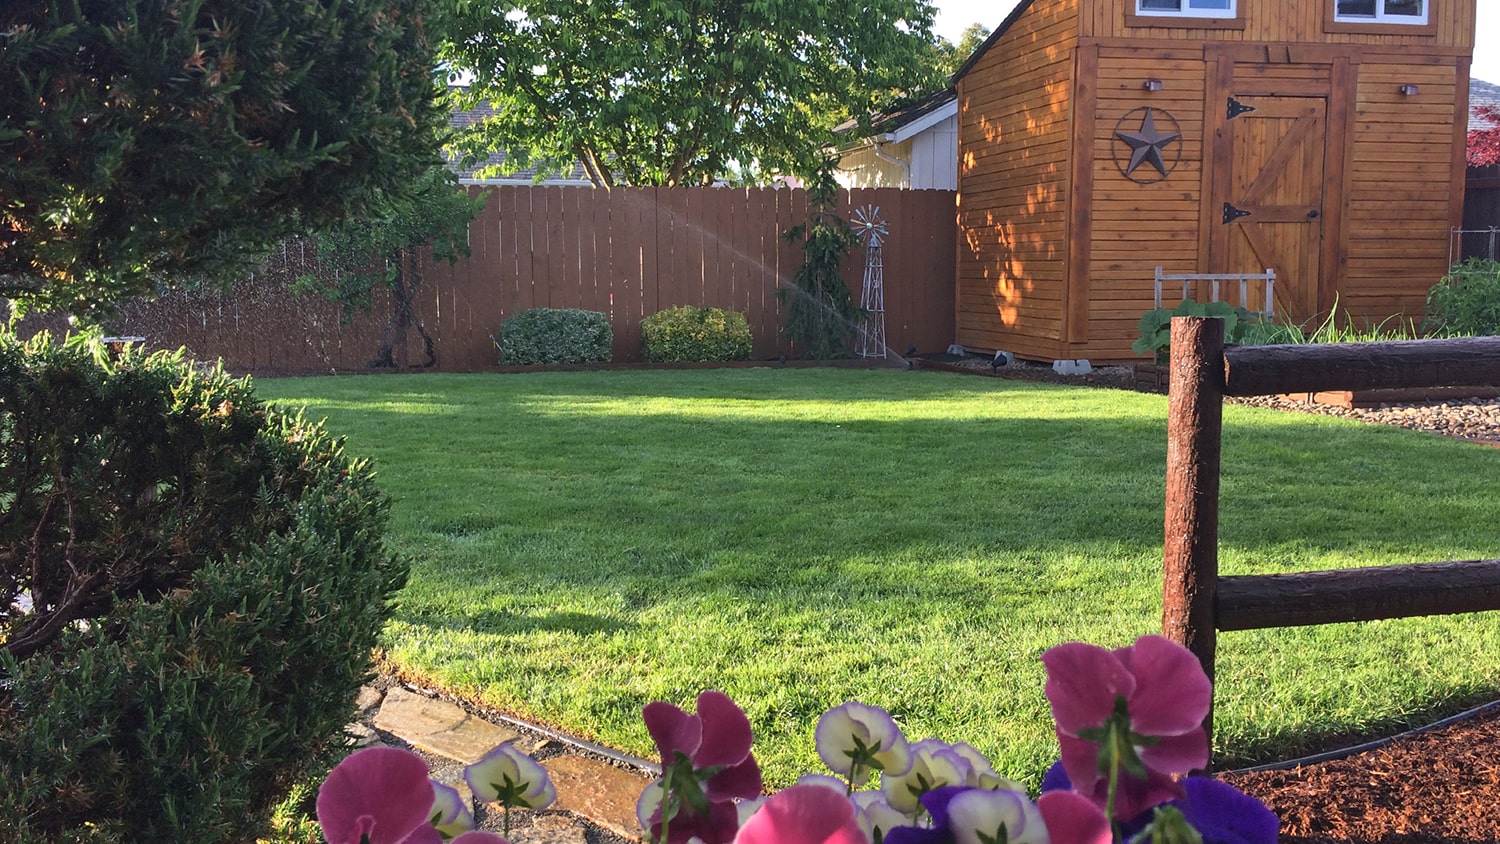 View of backyard with green lawn and wood shed in summer